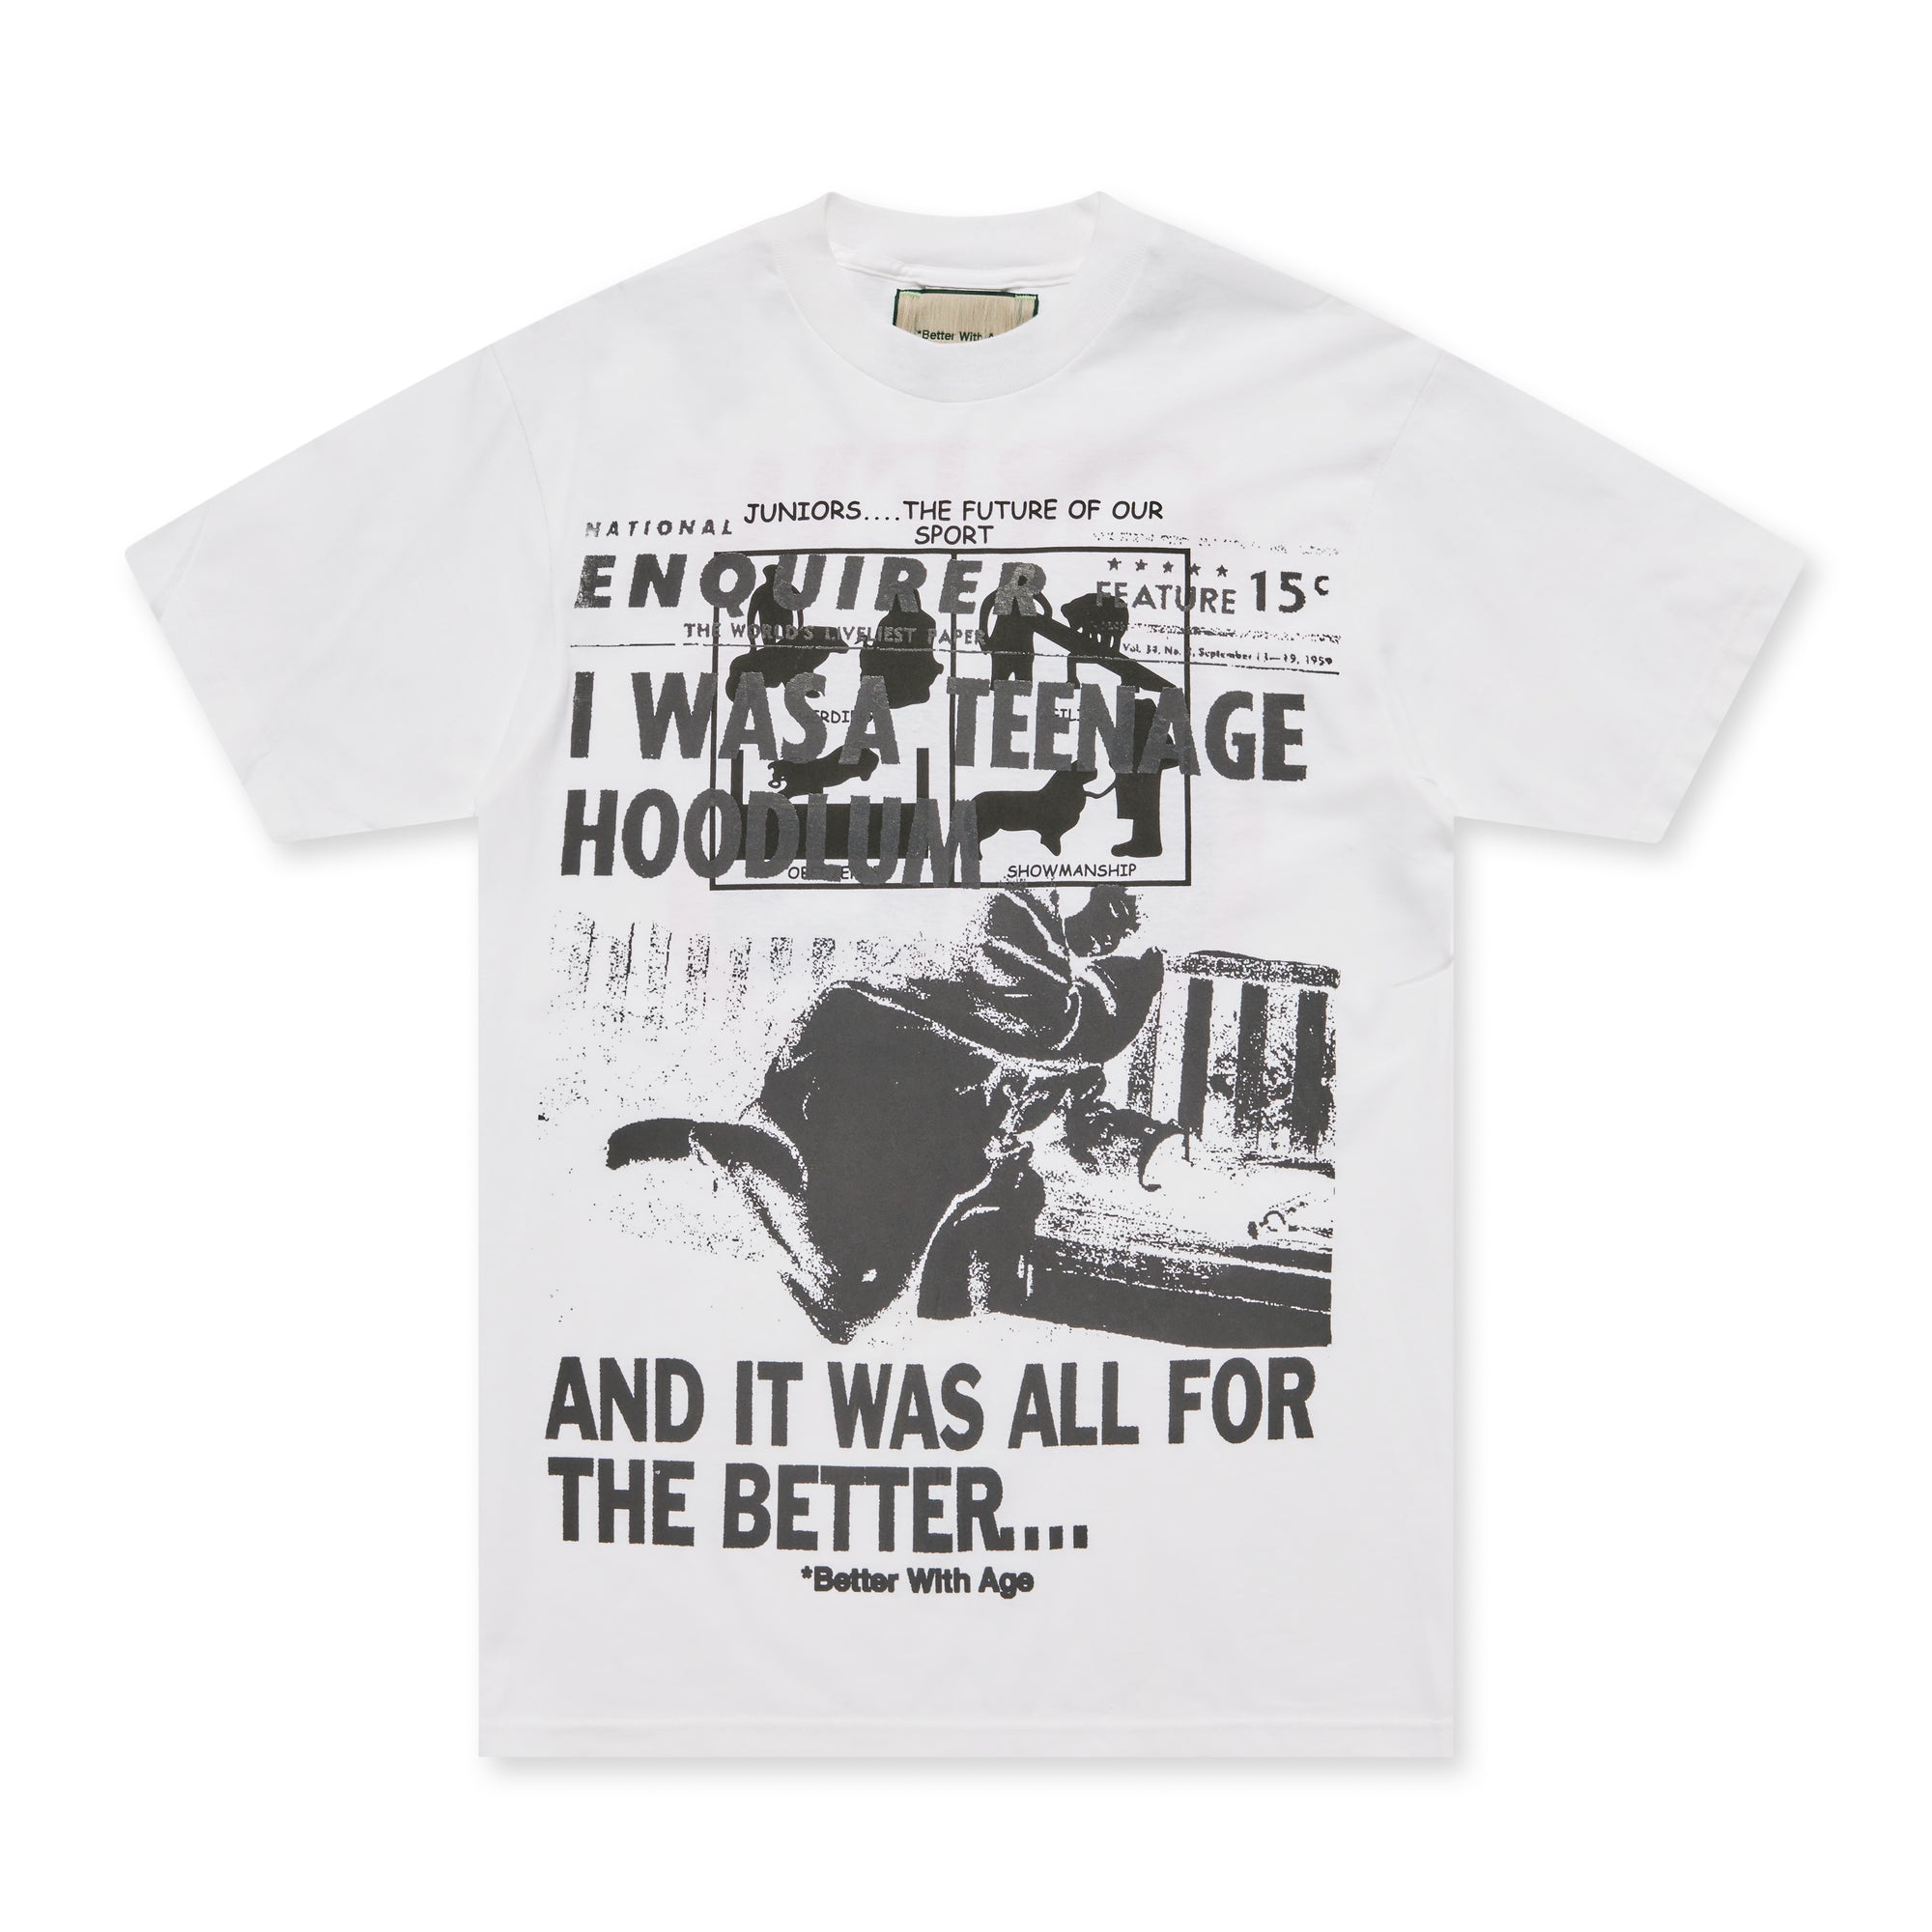 Better With Age - Men's Hoodlum Tee - (White) view 1